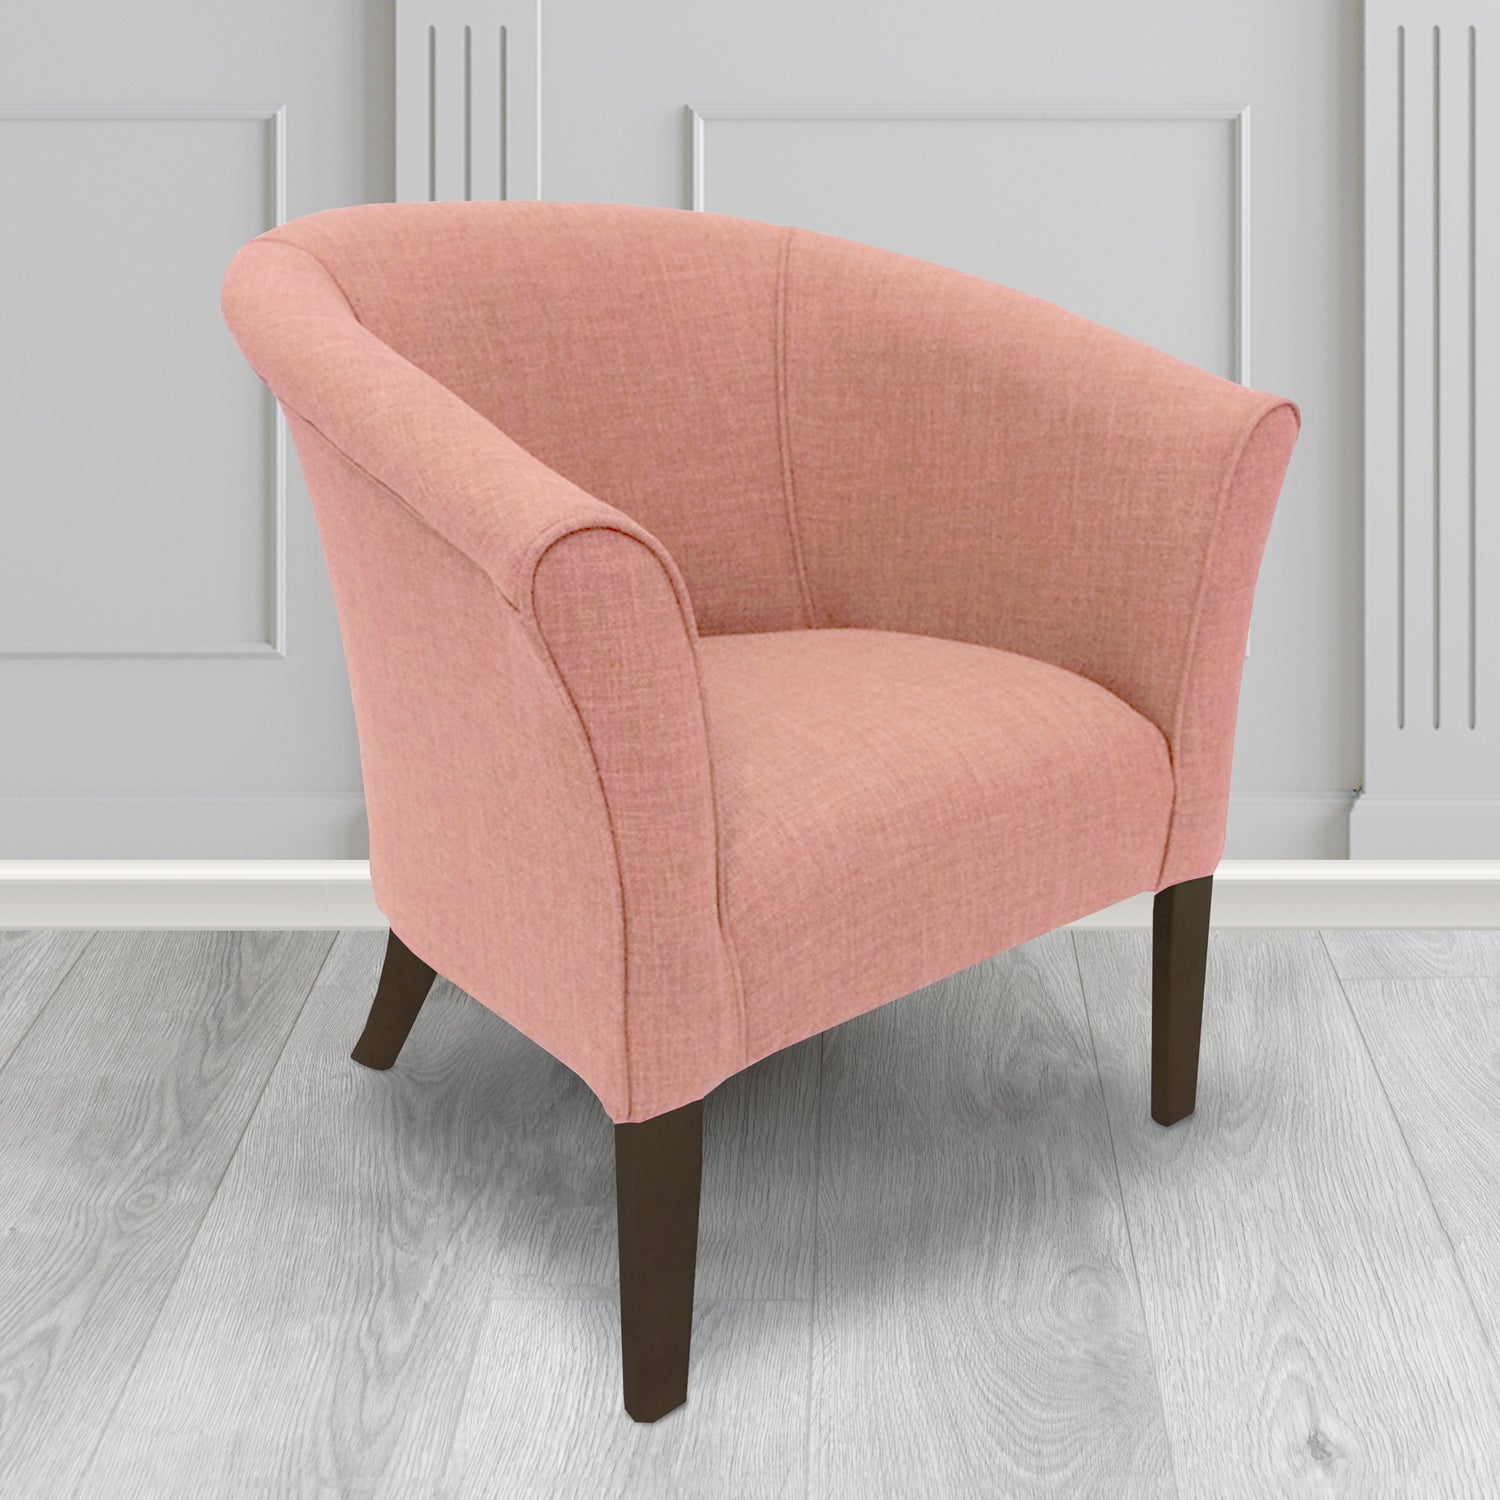 Quill Tub Chair in Linetta Salmon Crib 5 Plain Fabric - Antimicrobial, Stain Resistant & Waterproof - The Tub Chair Shop